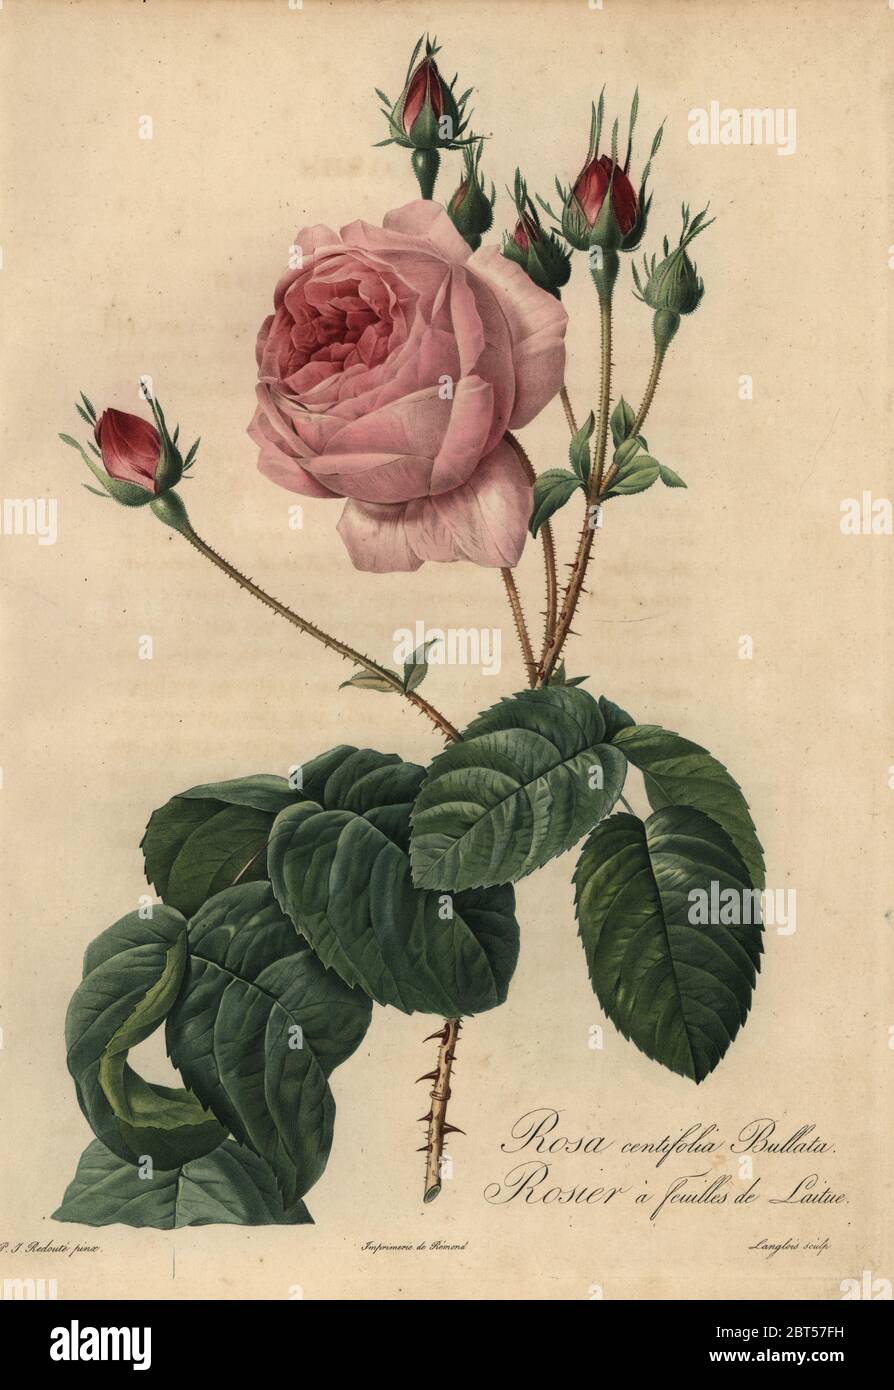 Pink lettuce rose Bullata, Rosa centifolia, Rosier a feuilles de laitue. Stipple copperplate engraving by Pierre Gabriel Langlois handcoloured a la poupee after a botanical illustration by Pierre-Joseph Redoute from the first folio edition of Les Roses, Firmin Didot, Paris, 1817. Stock Photo